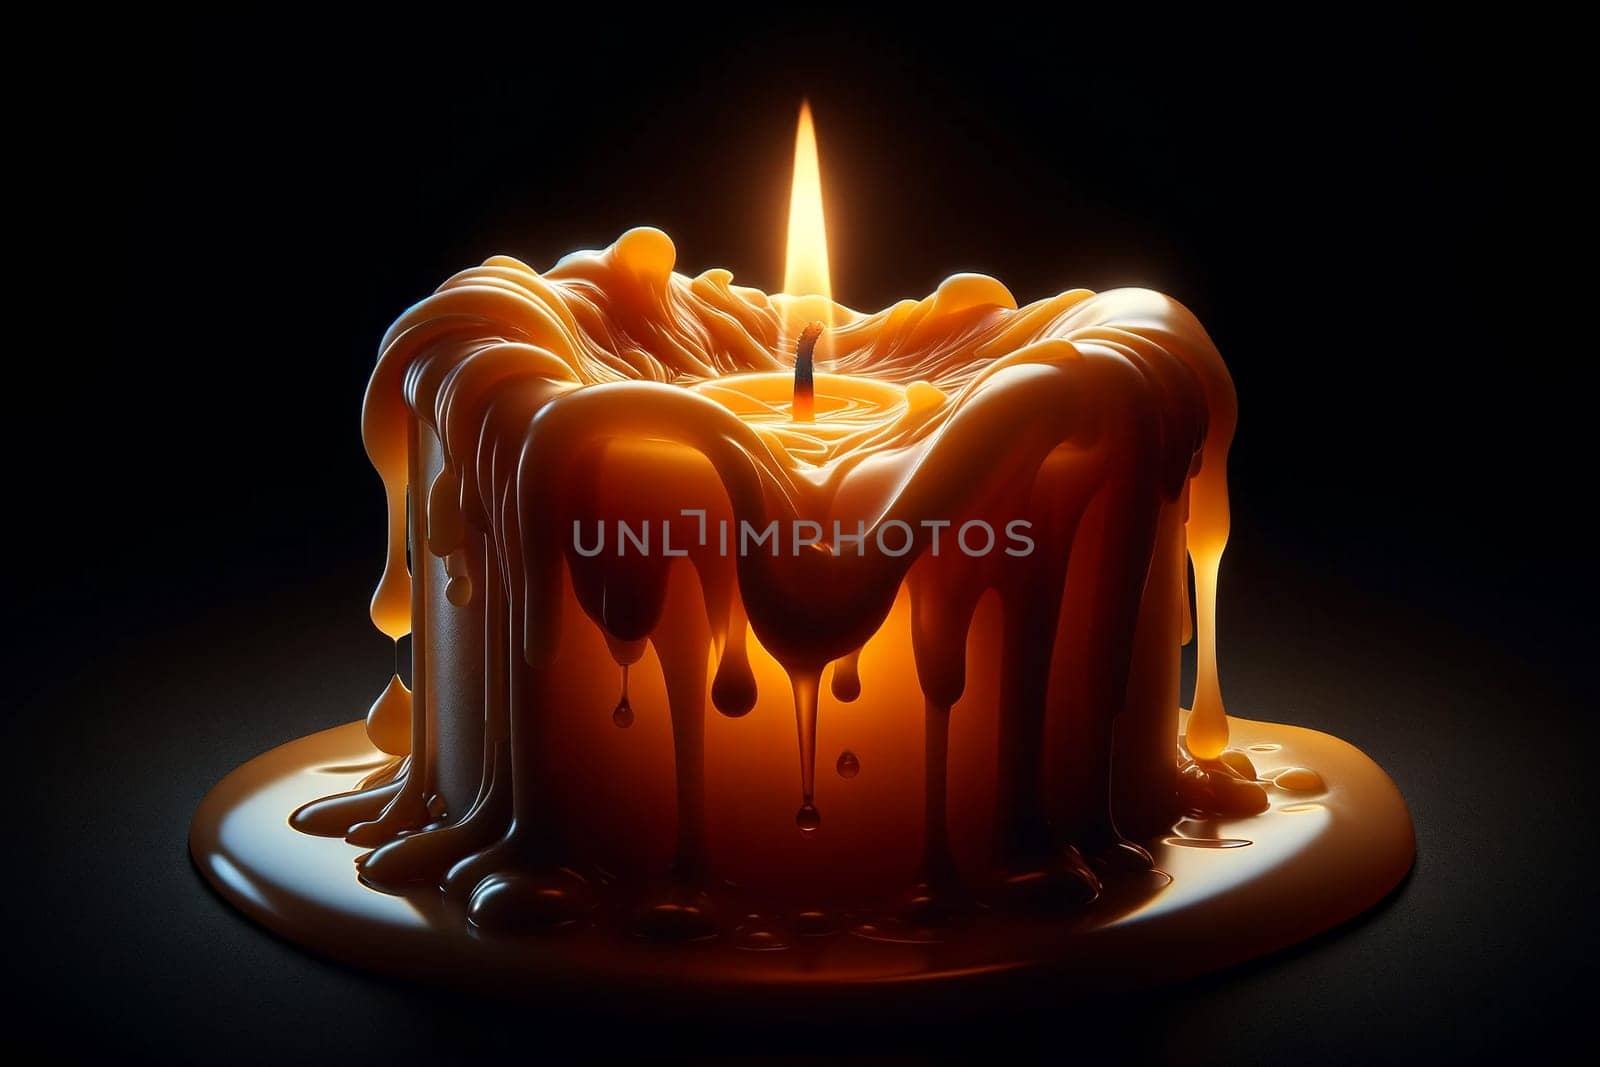 burning wax candle on a black background, conveying the detailed texture of melting wax and the warm glow of the flame.